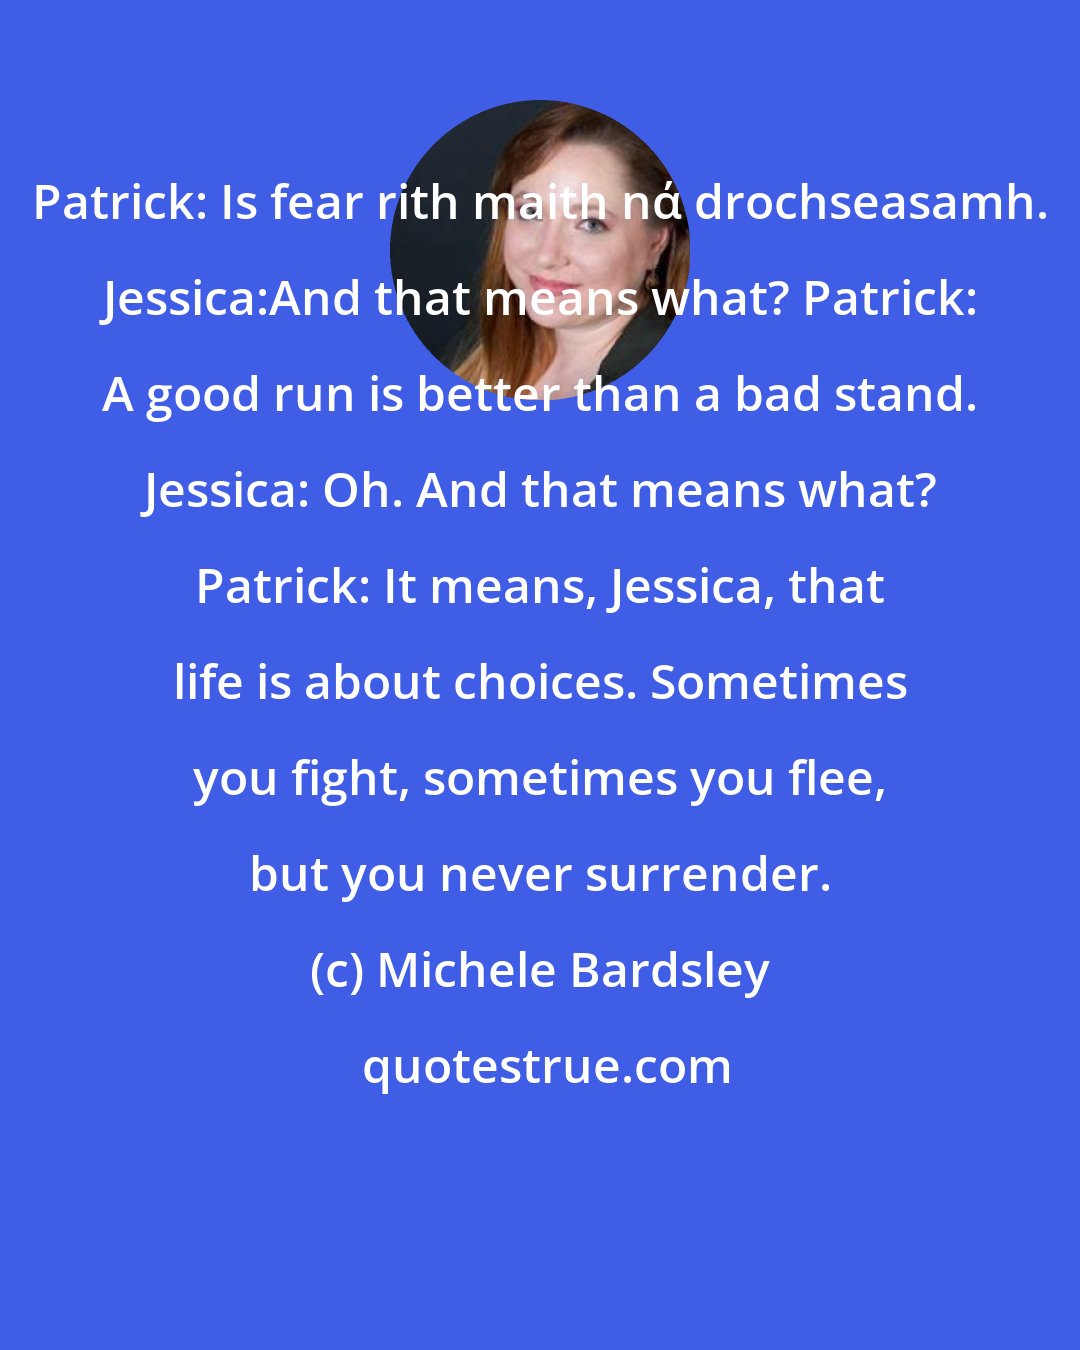 Michele Bardsley: Patrick: Is fear rith maith nά drochseasamh. Jessica:And that means what? Patrick: A good run is better than a bad stand. Jessica: Oh. And that means what? Patrick: It means, Jessica, that life is about choices. Sometimes you fight, sometimes you flee, but you never surrender.